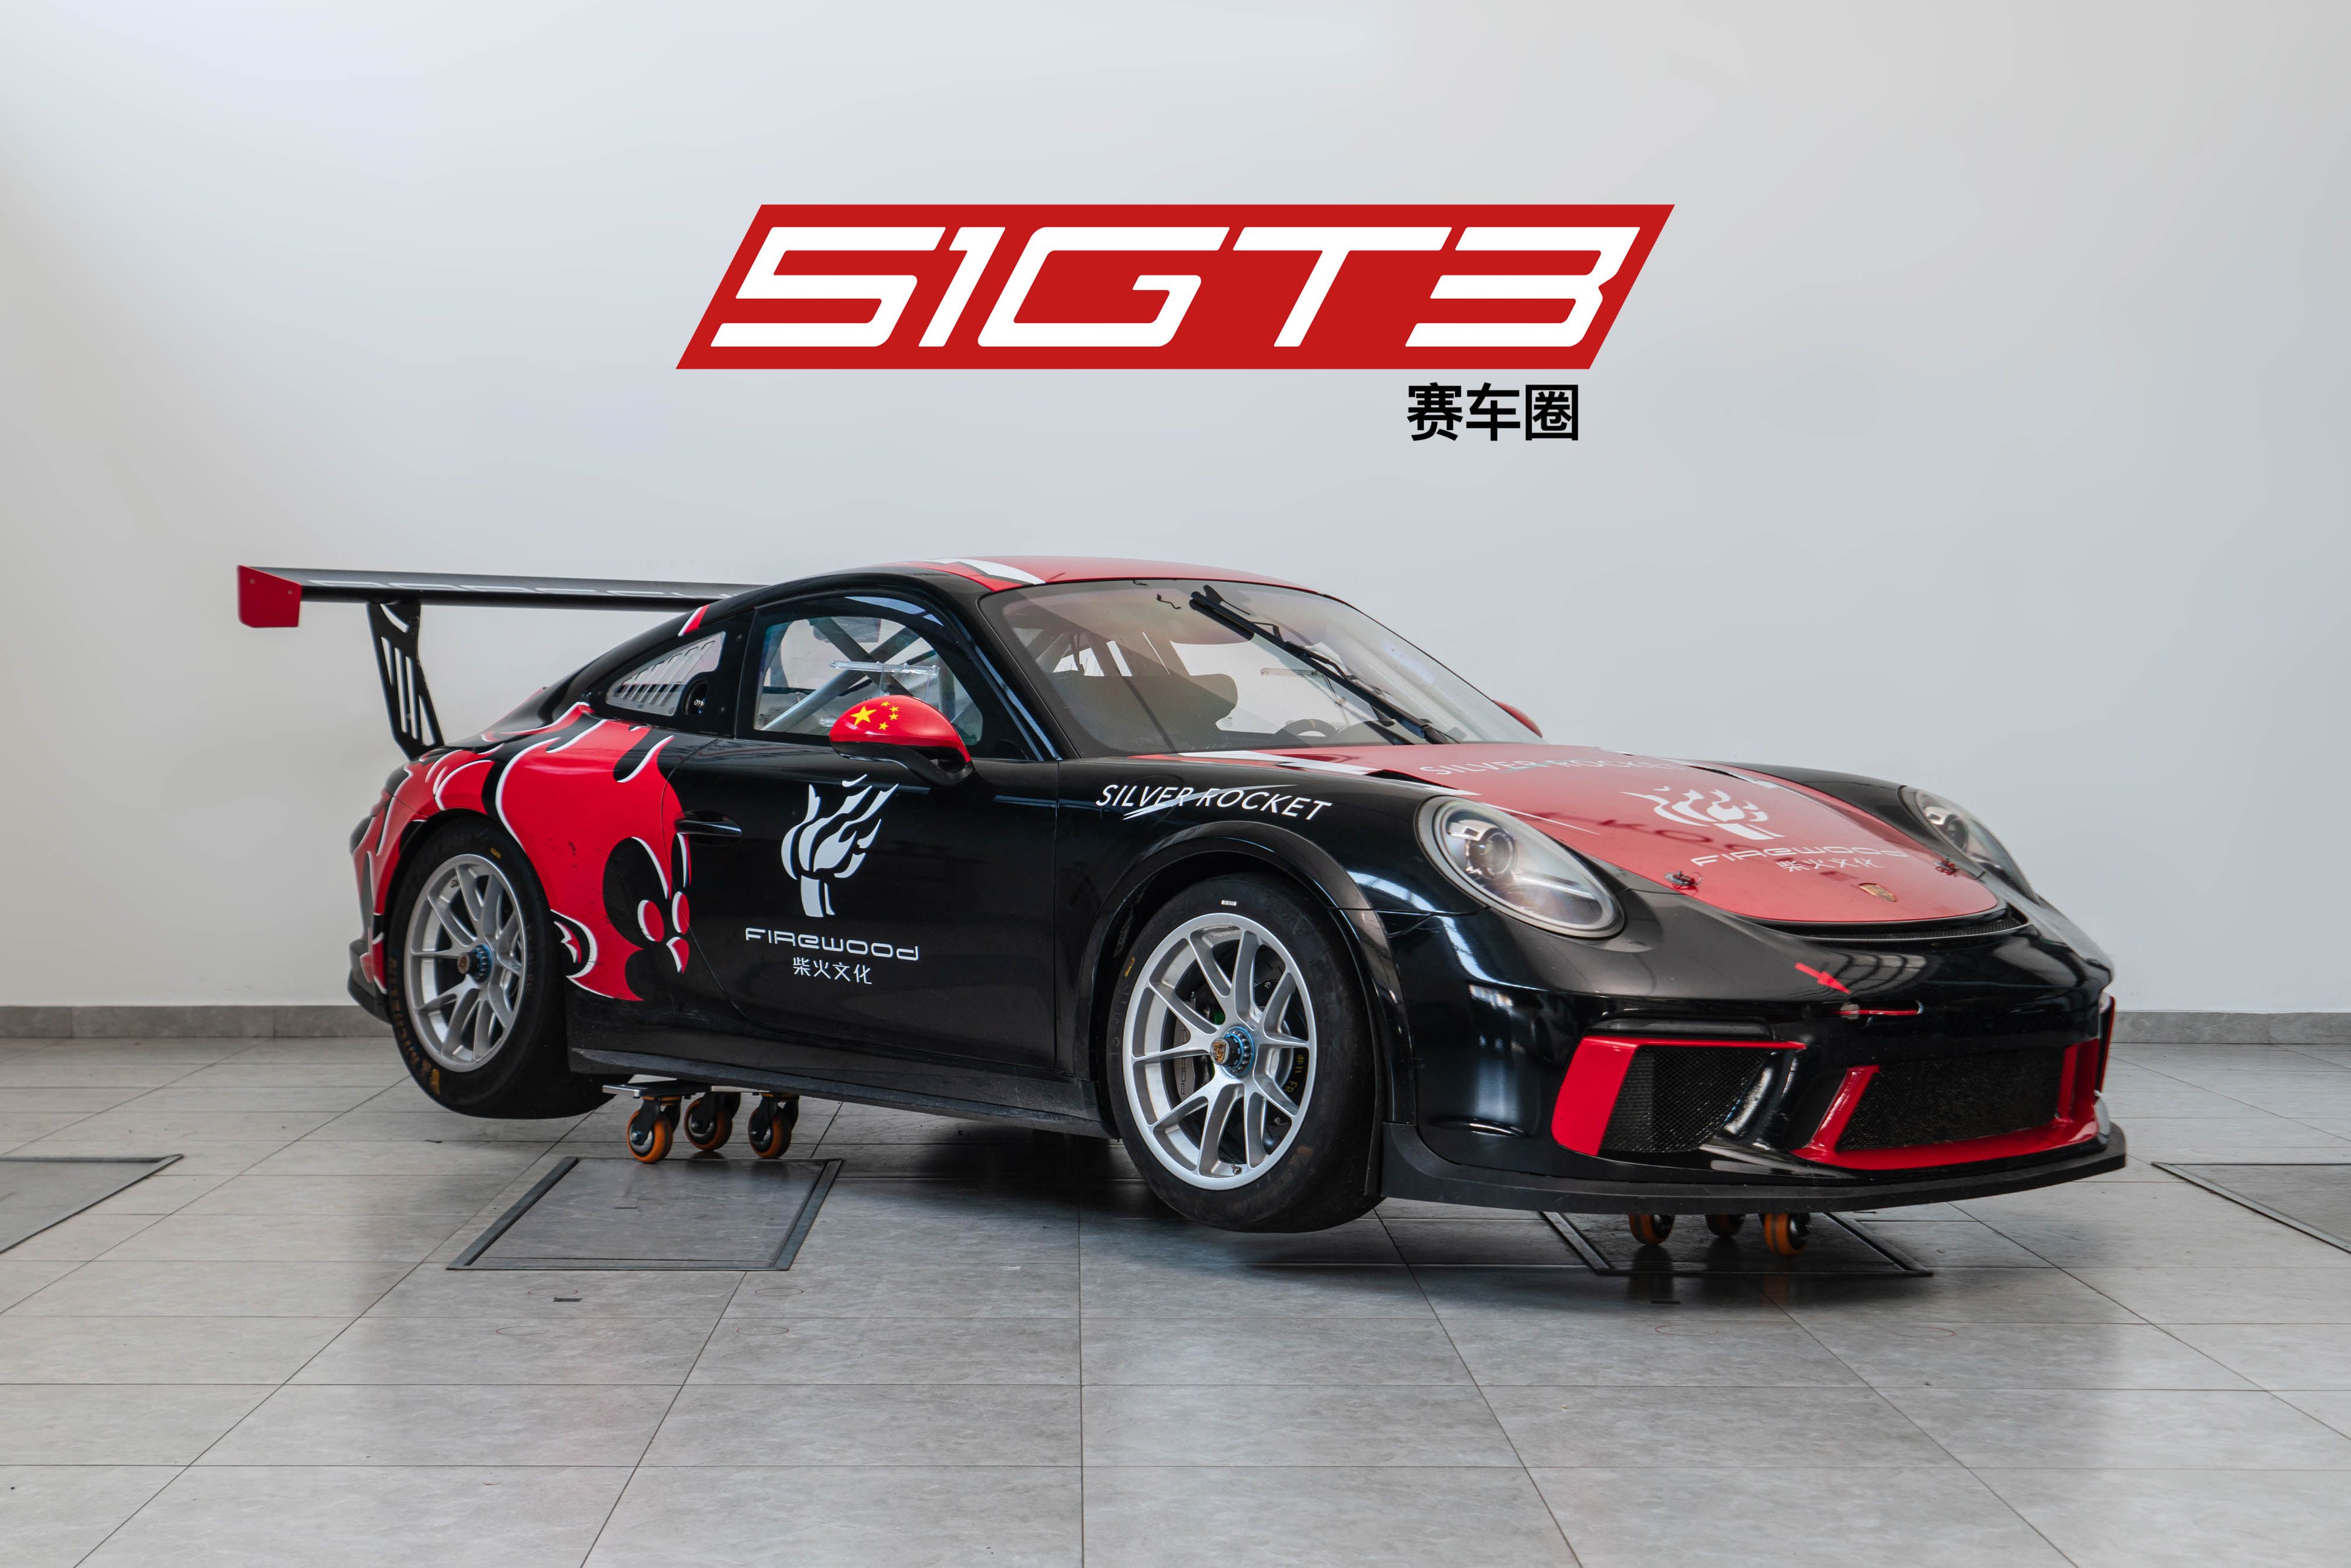 2019 Porsche 911 GT3 CUP (Type 991.2, with ABS）-English Version